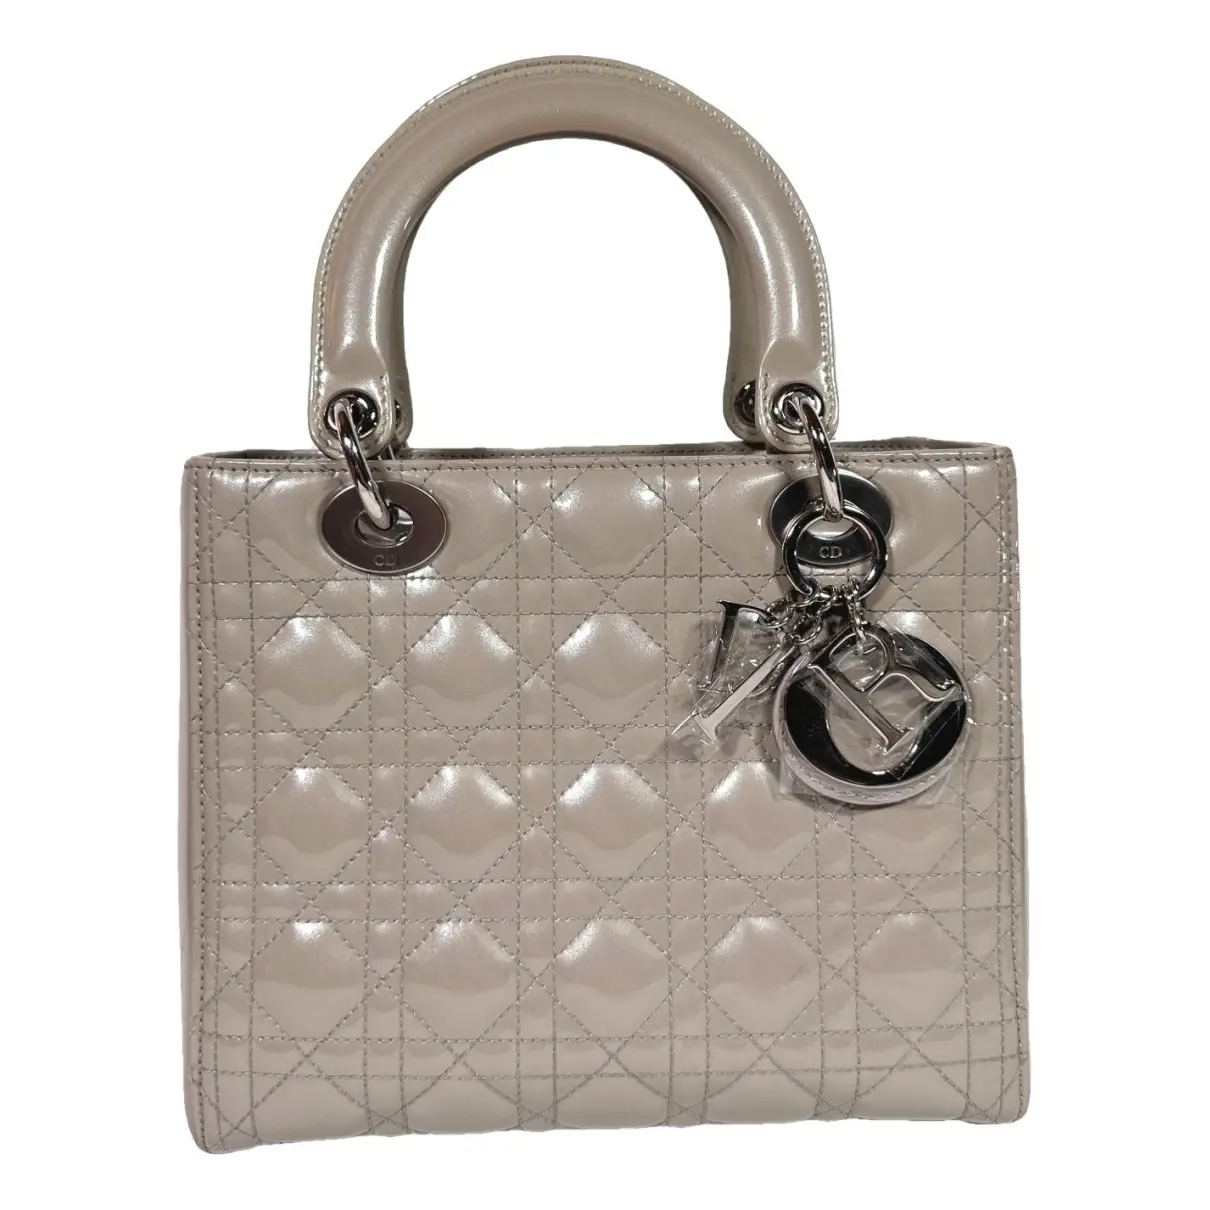 Lady Dior Bag for women  Buy or Sell your Designer bags online! -  Vestiaire Collective